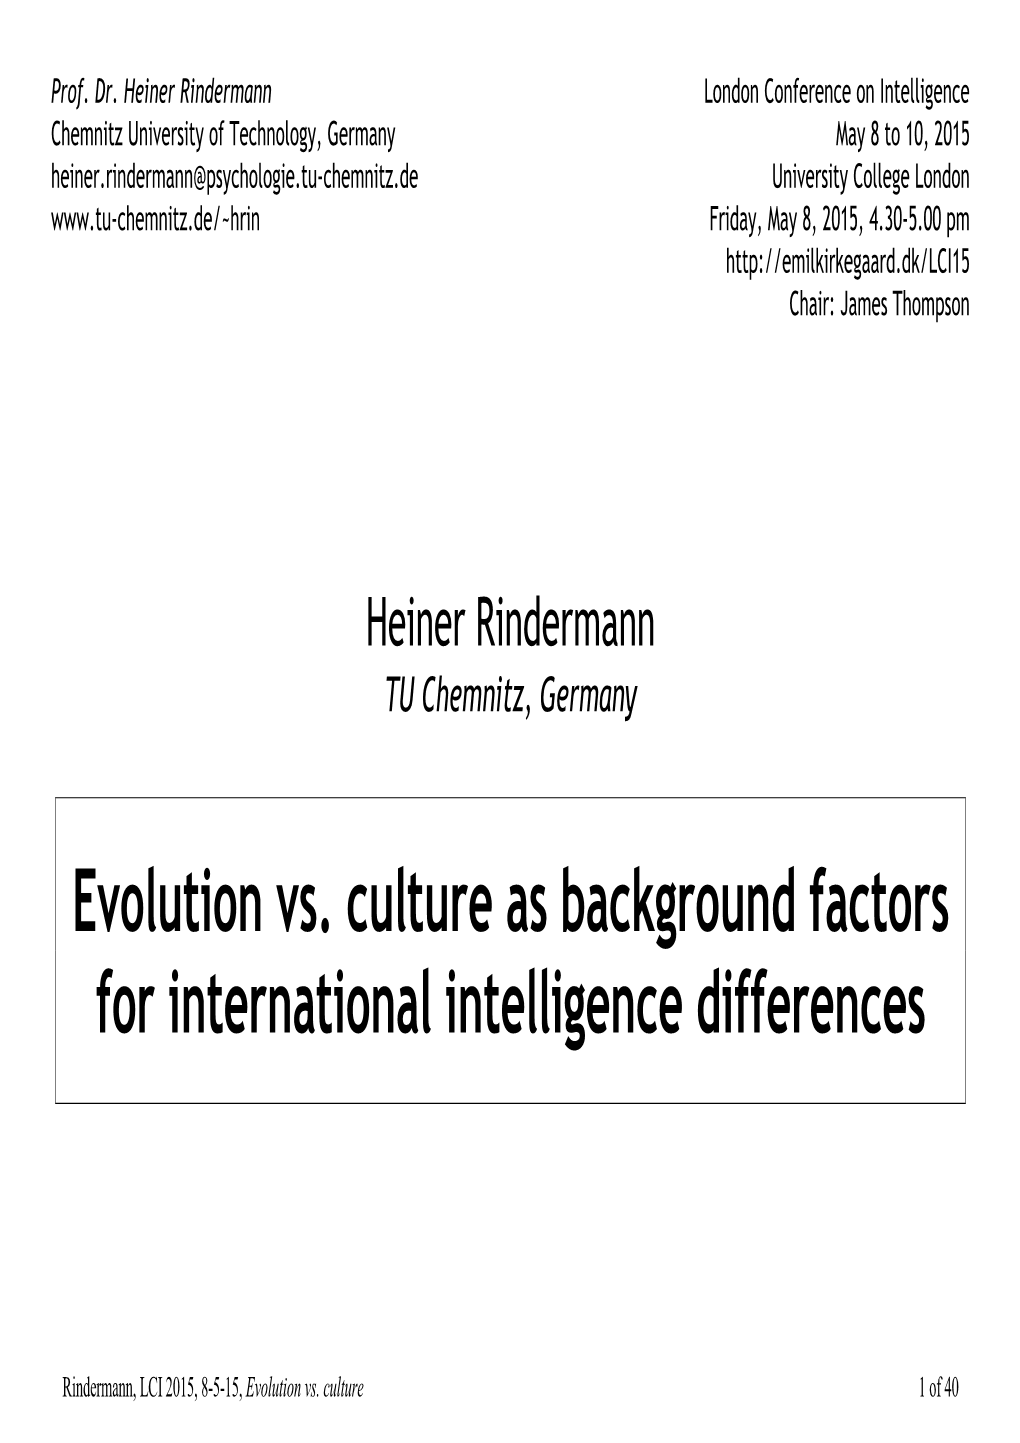 Evolution Vs. Culture As Background Factors for International Intelligence Differences